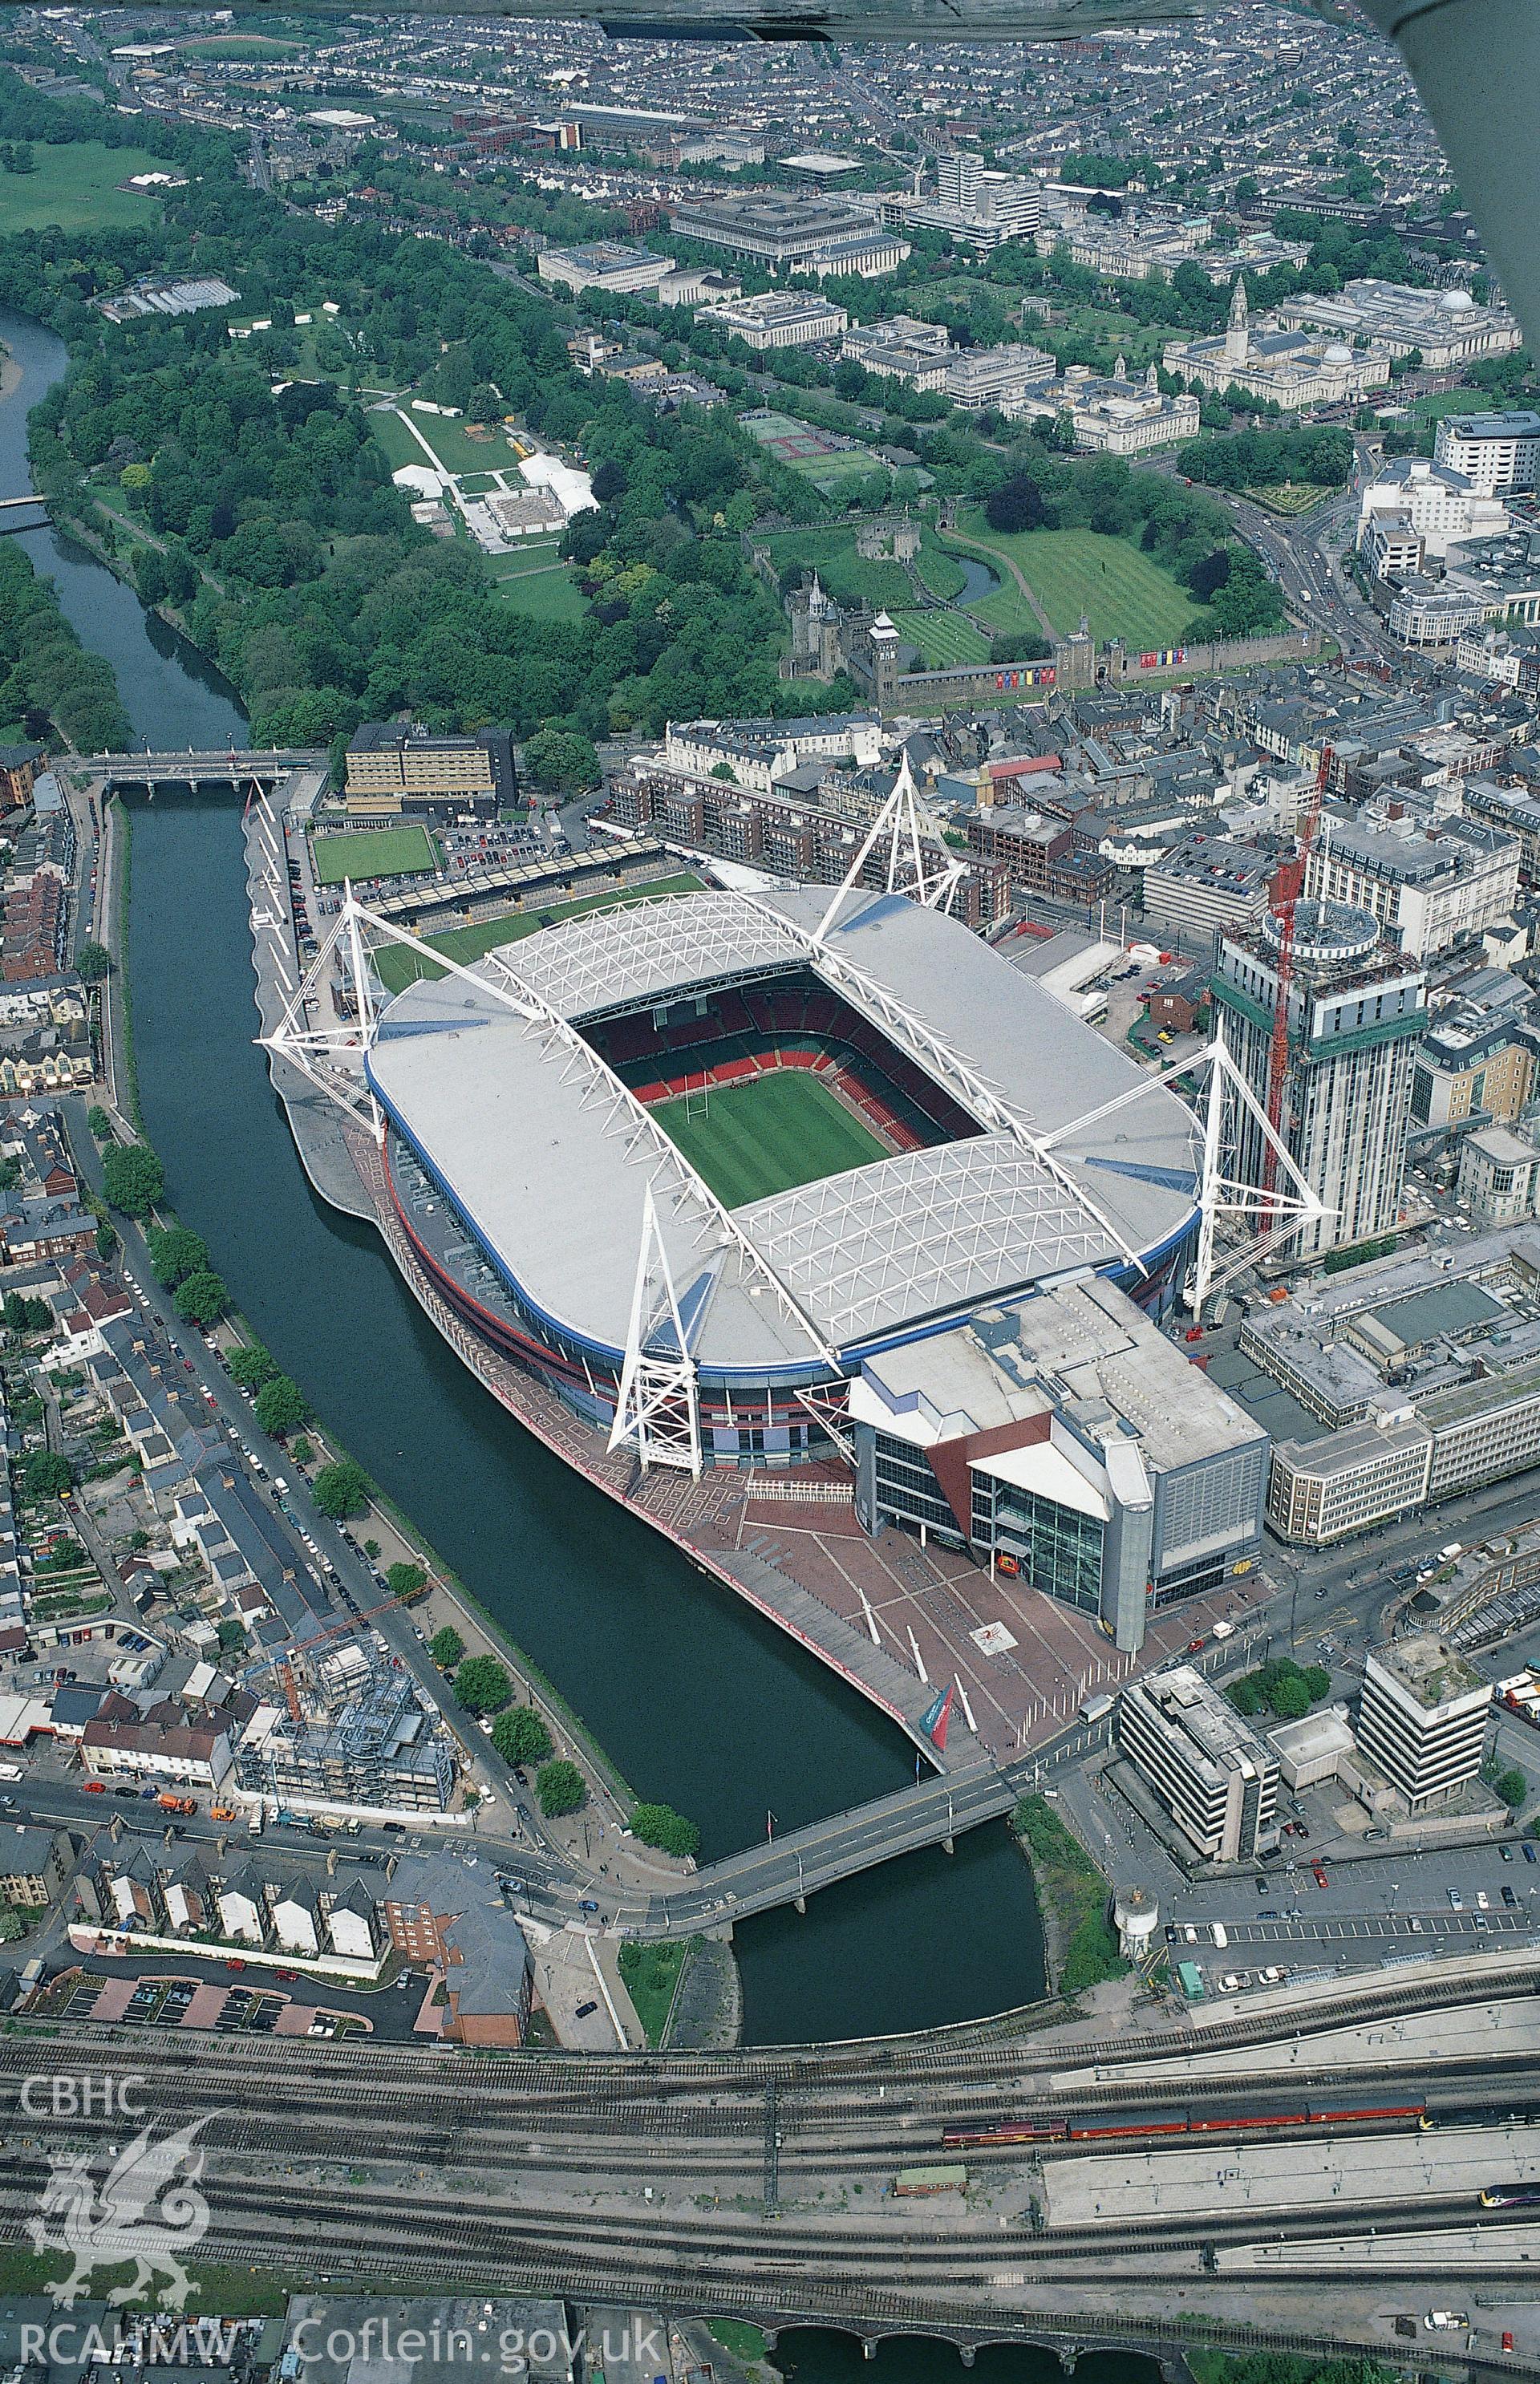 RCAHMW colour oblique aerial photograph of Cardiff, Millennium Stadium, and city centre. Taken by Toby Driver on 16/05/2002